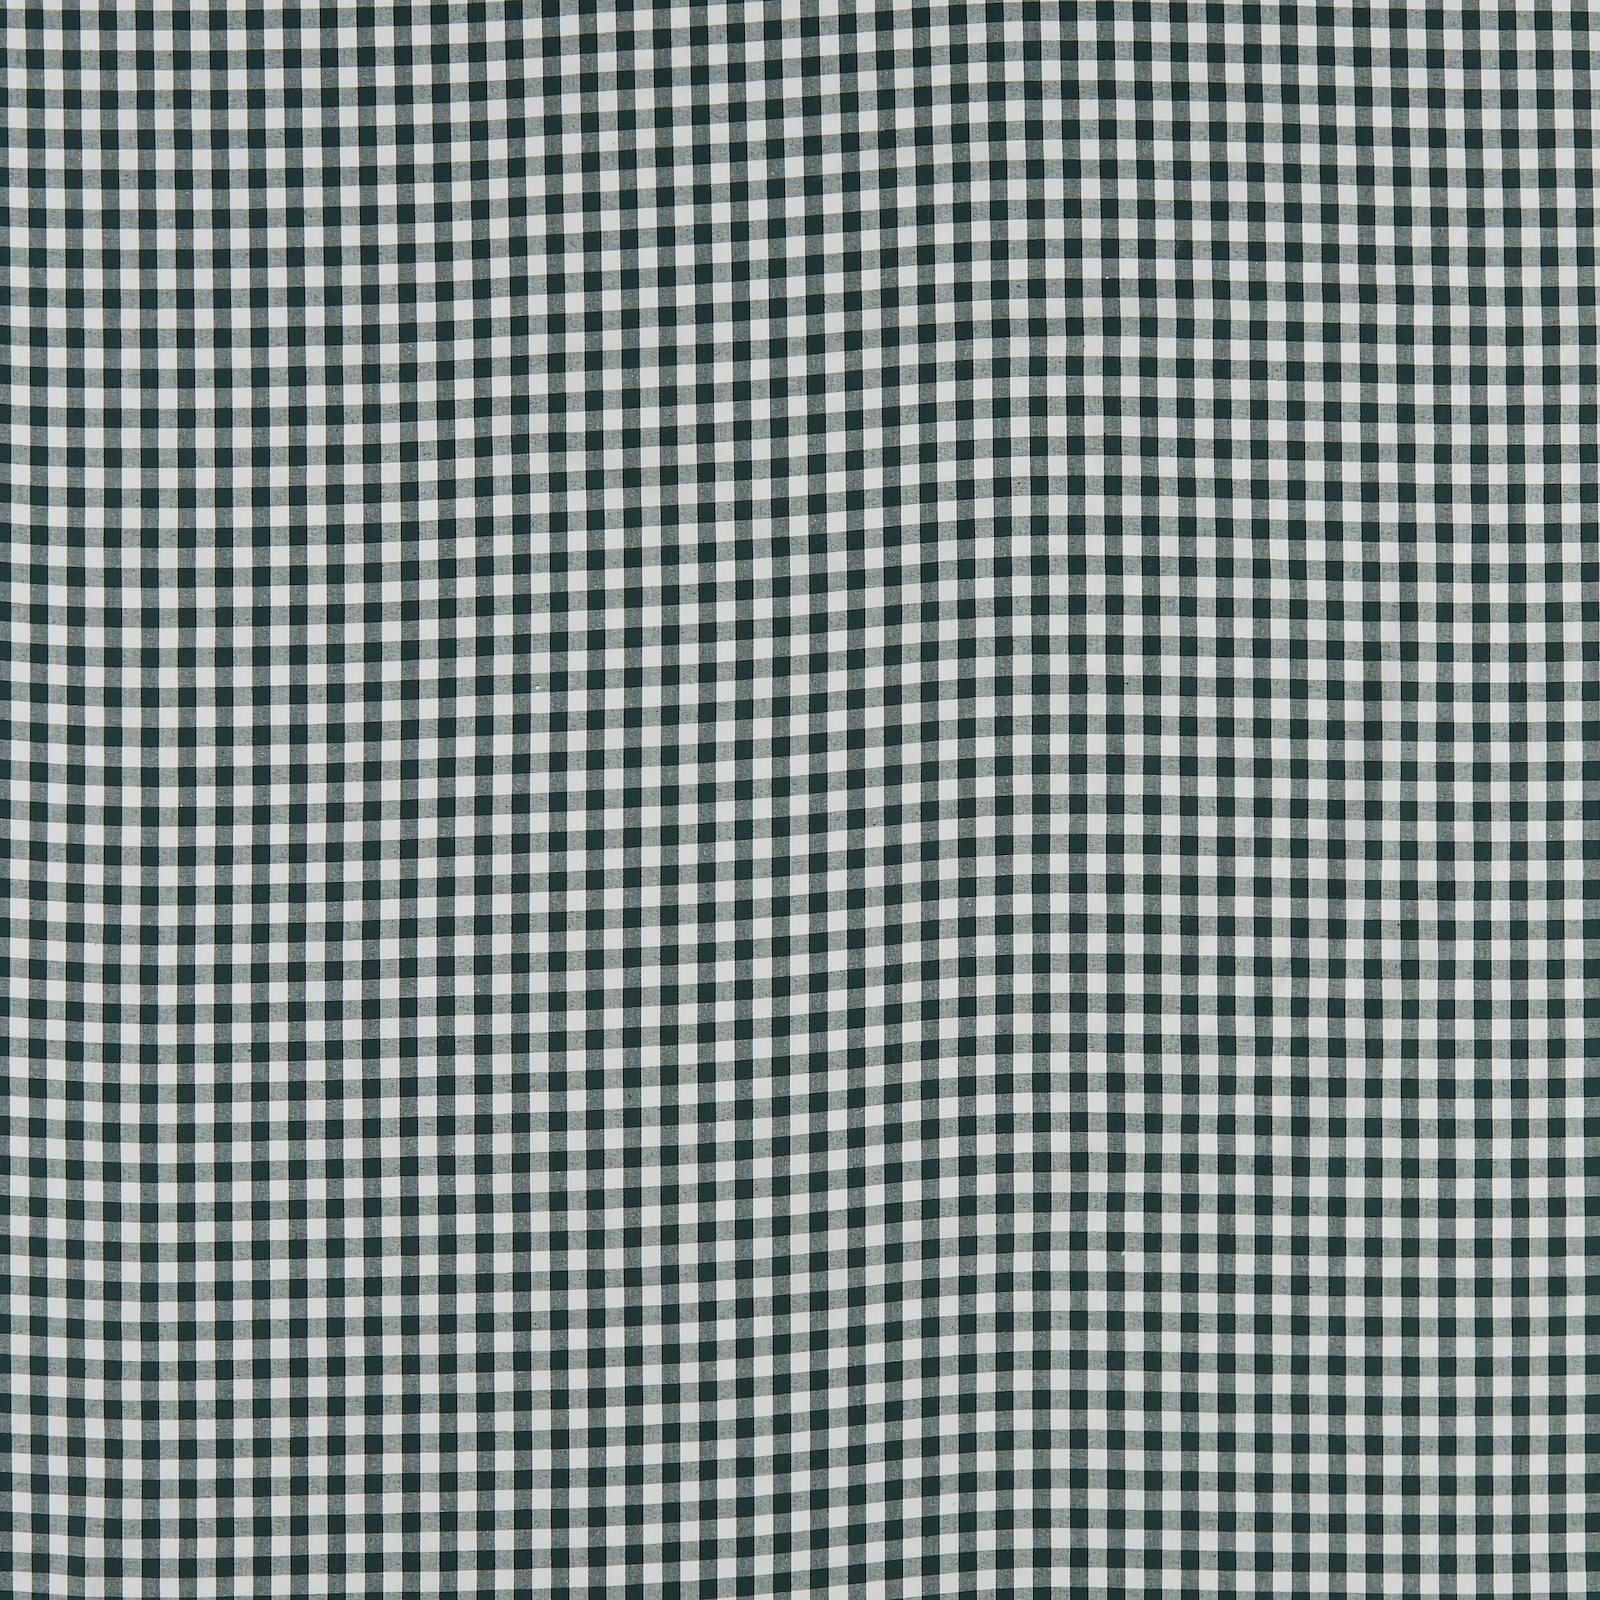 Cotton yarn dyed charcoal/white check 780904_pack_sp